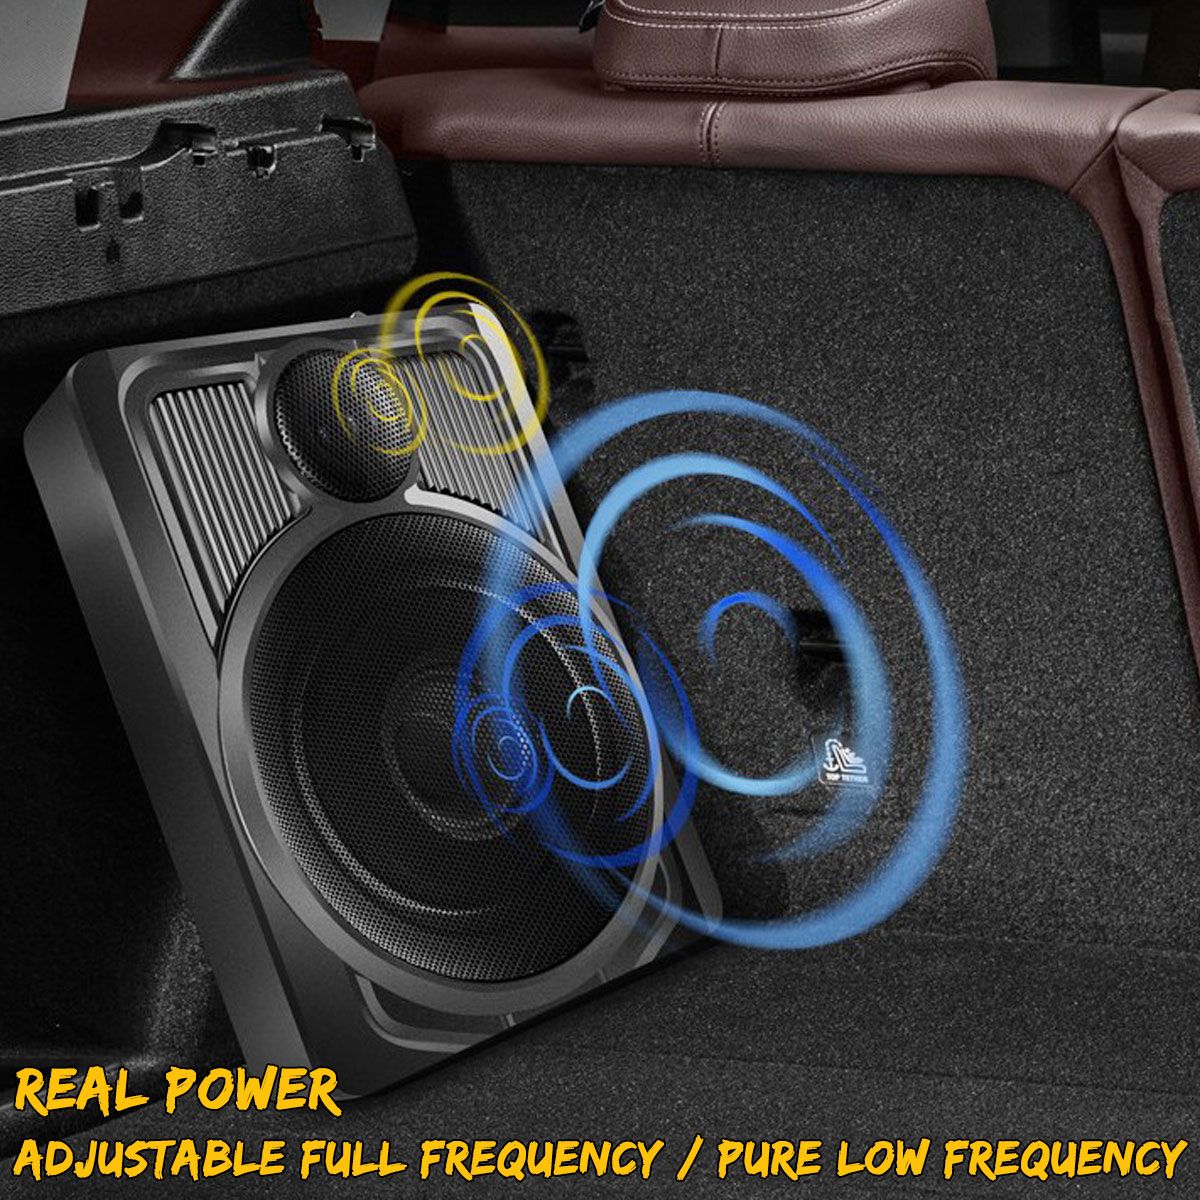 Bakeey-600W-Subwoofer-12V-Car-Ultra-thin-10-inch-With-Tweeter-Subwoofer-Dedicated-Full-range-Subwoof-1746877